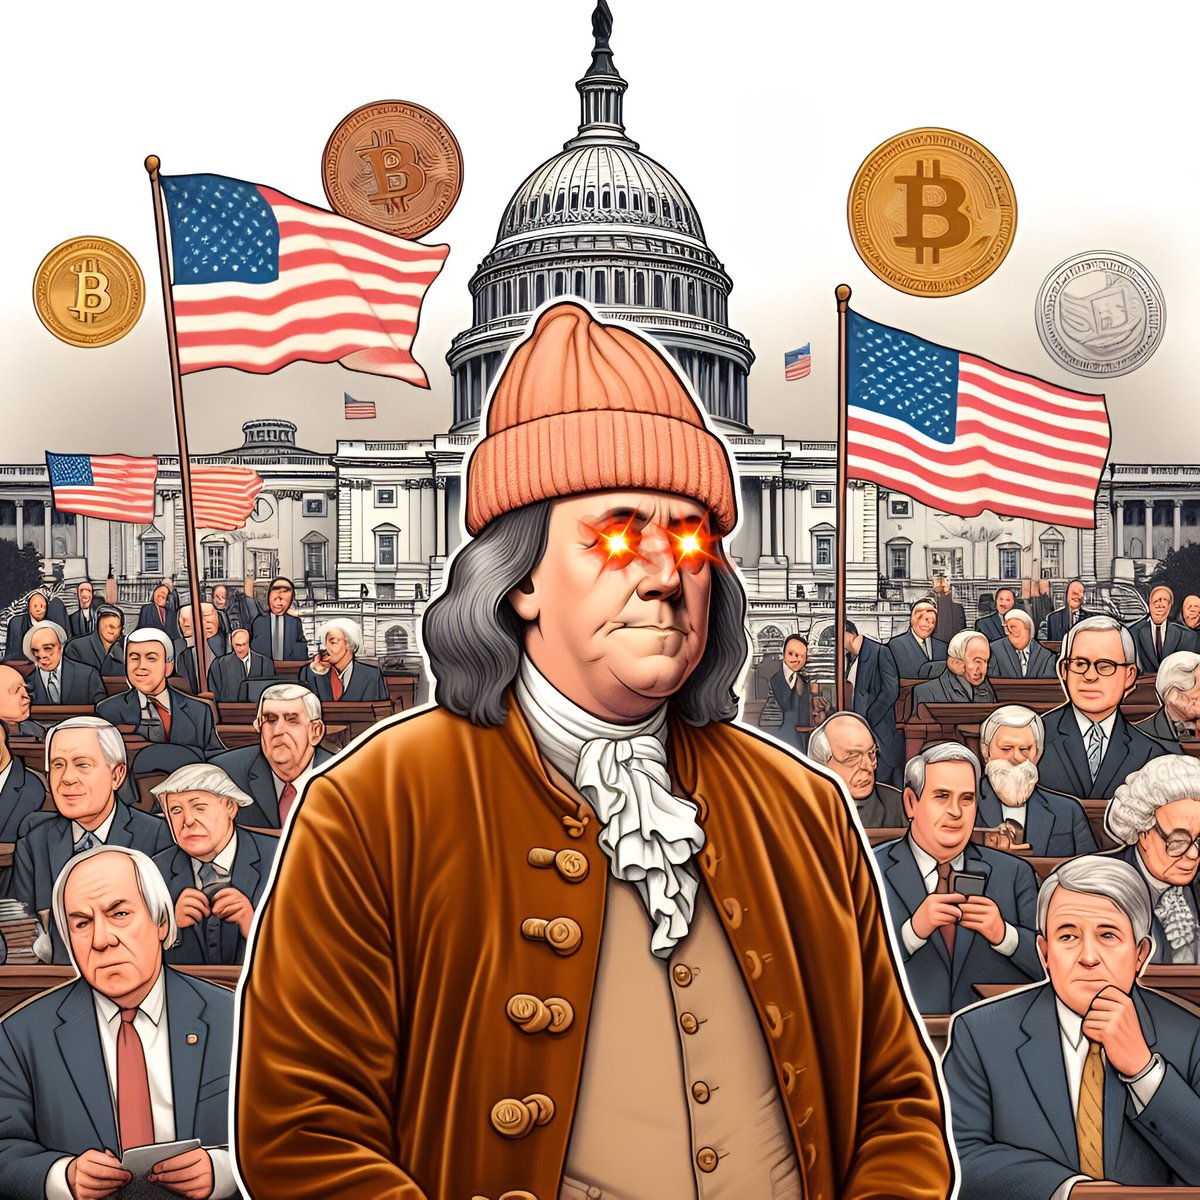 $BWIF Is the US setting crypto legislative standards for the world? Let us know what you think!

#BenWIfHat #LaserEyeBen #BWIFonSOL #cryptocurrency #CryptoNews #SEC #CryptoLegislation